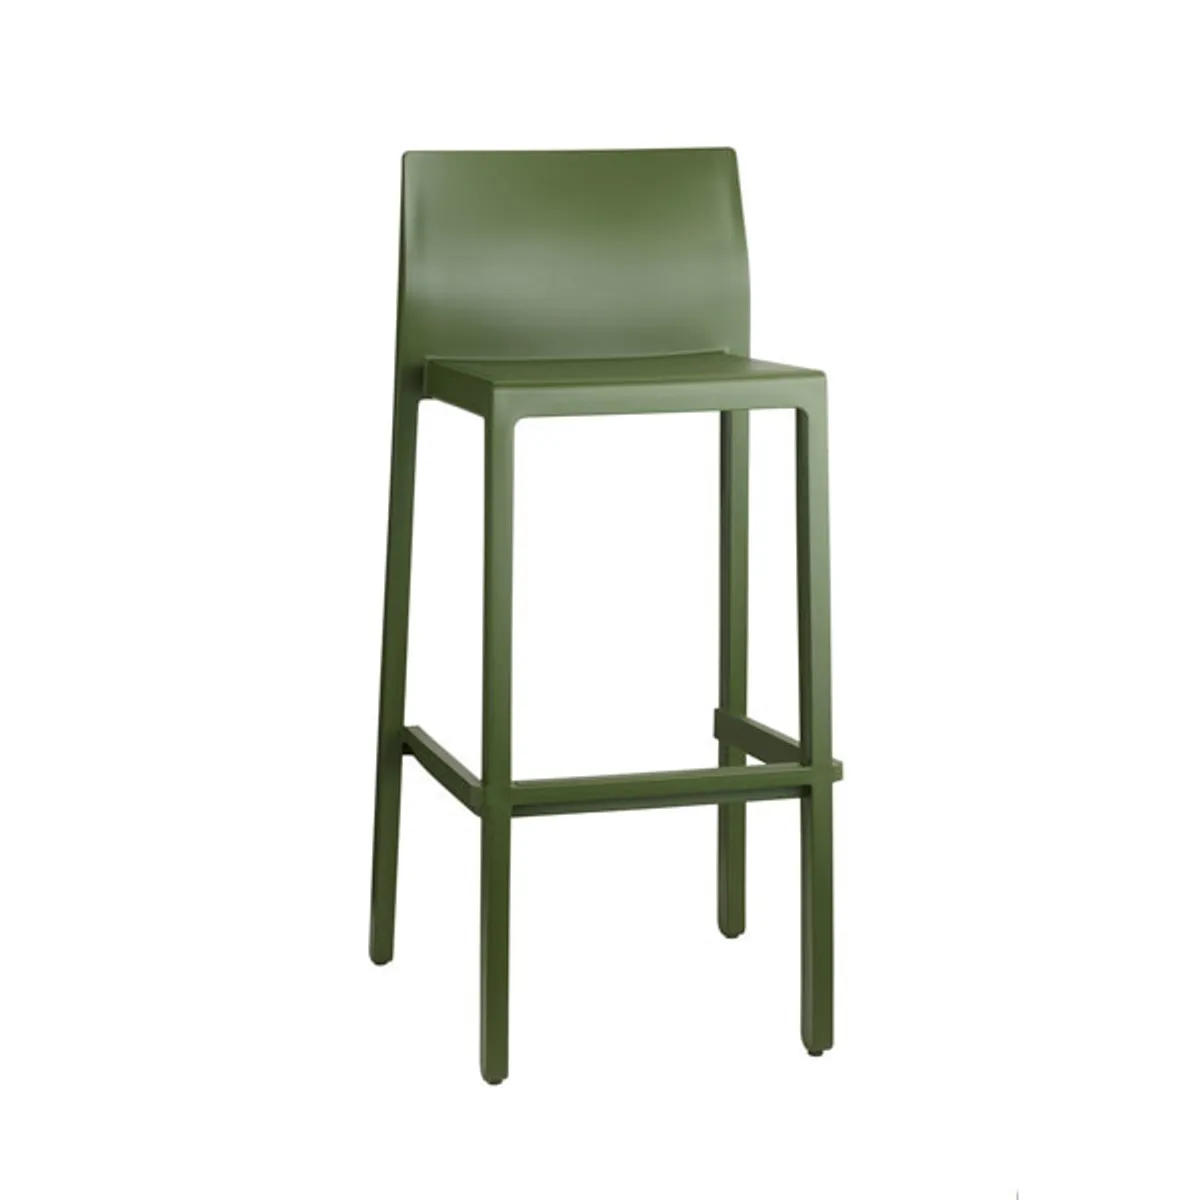 Remi bar stool bar height 2 Inside Out Contracts